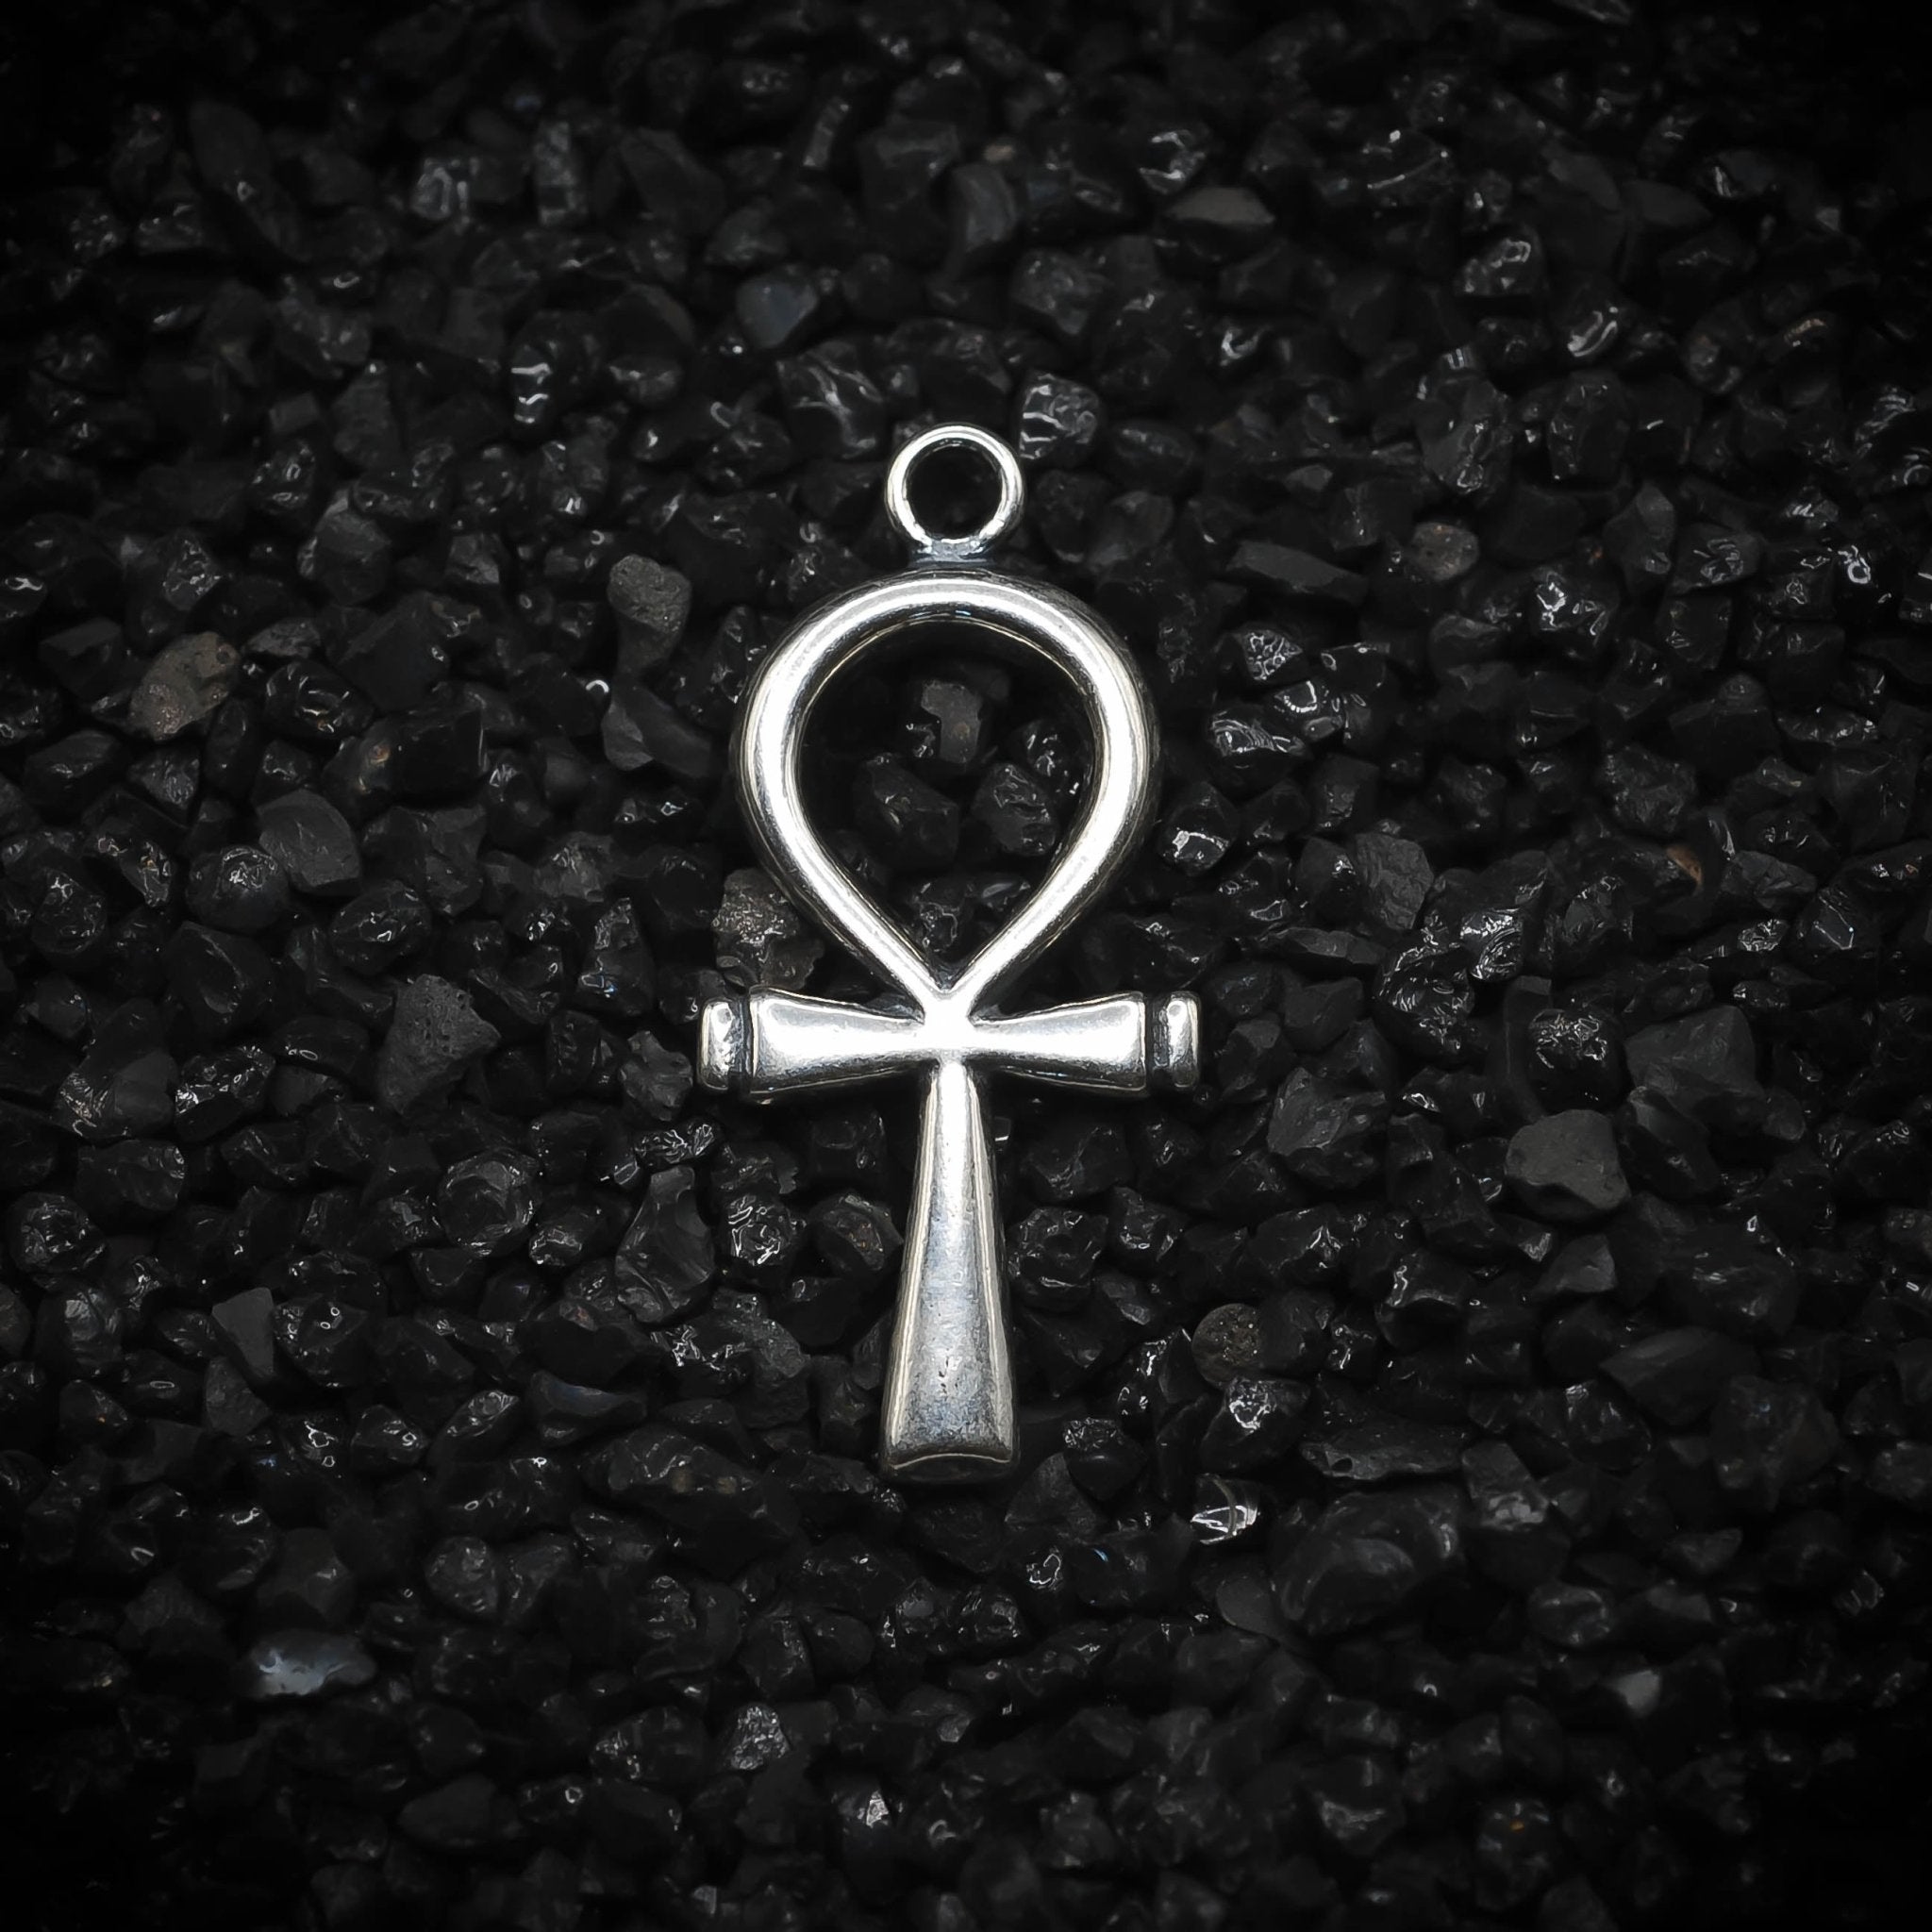 Ankh Key of Eternal Life Smooth Hieroglyphics Ancient Egyptian Charm | 925 Sterling Silver, Oxidized or 18K Gold Plated | Jewelry Making Pendant - HarperCrown